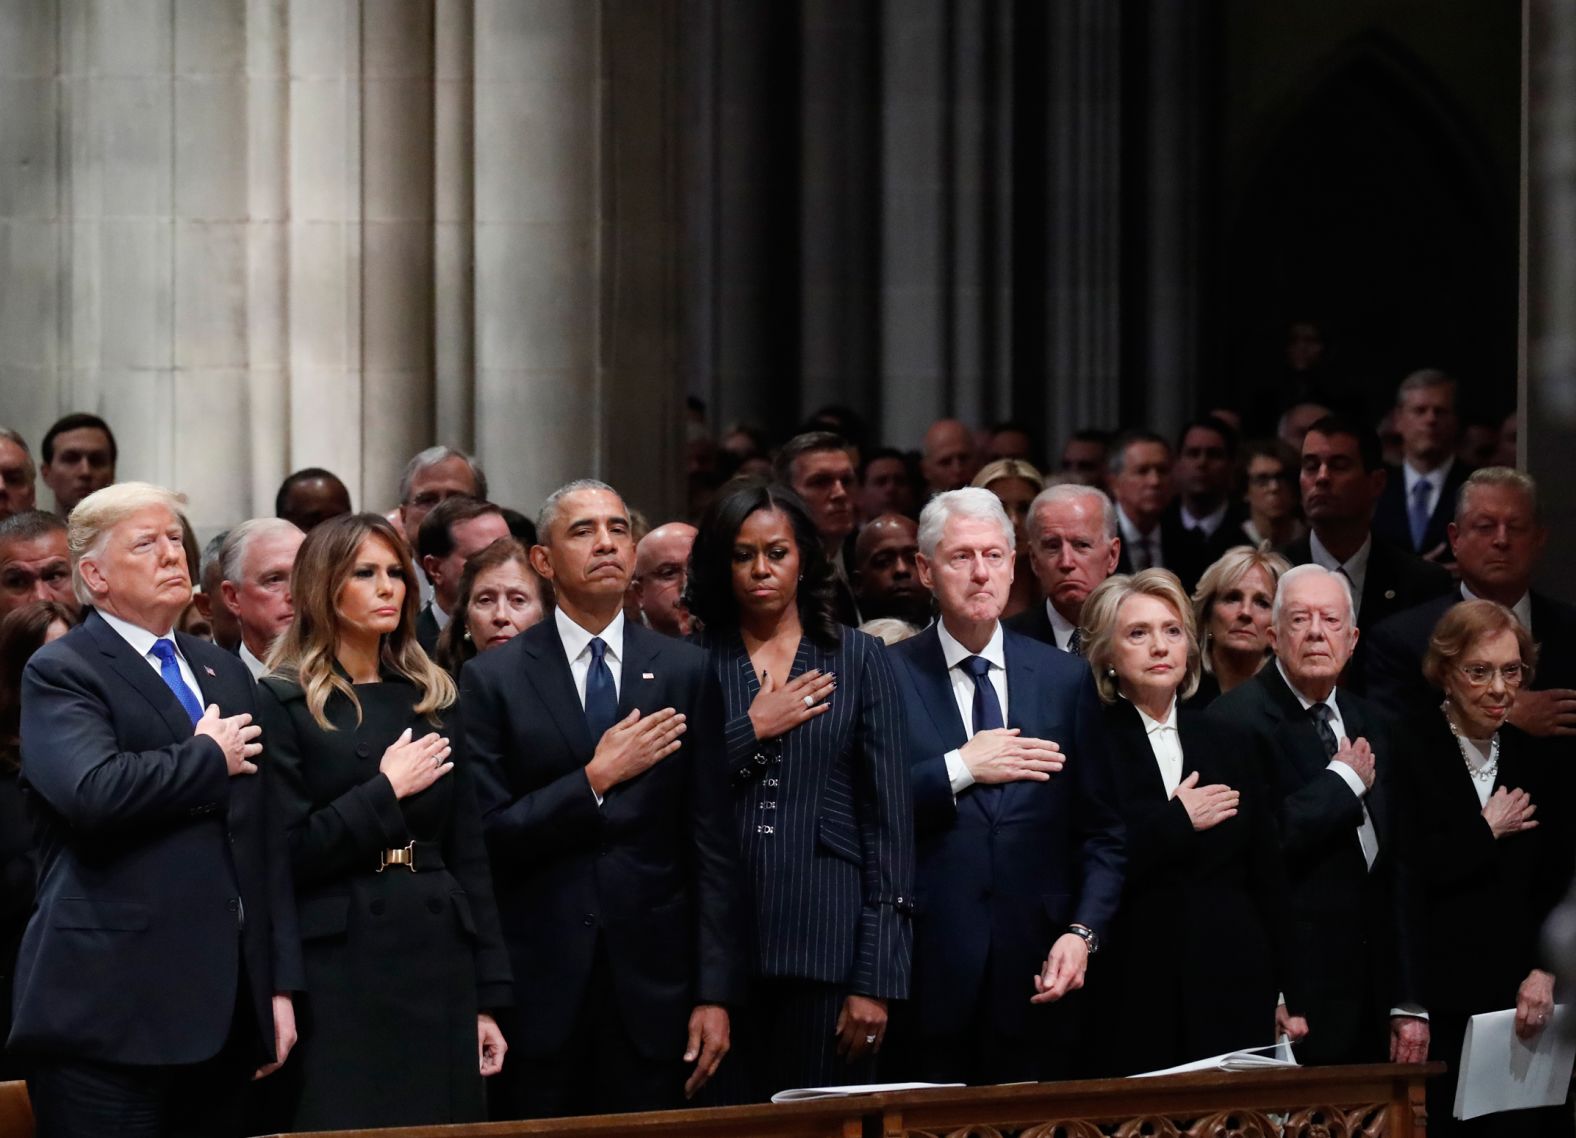 President Trump and his wife, Melania, join former US presidents and their wives at <a href="https://www.cnn.com/2018/12/02/politics/gallery/george-h-w-bush-memorials/index.html" target="_blank">the state funeral of George H.W. Bush</a> on December 5. In the front row, from left, are the Trumps, Barack and Michelle Obama, Bill and Hillary Clinton, and Jimmy and Rosalynn Carter. Bush, the patriarch of one of America's dominant political dynasties, died November 30 at age 94.